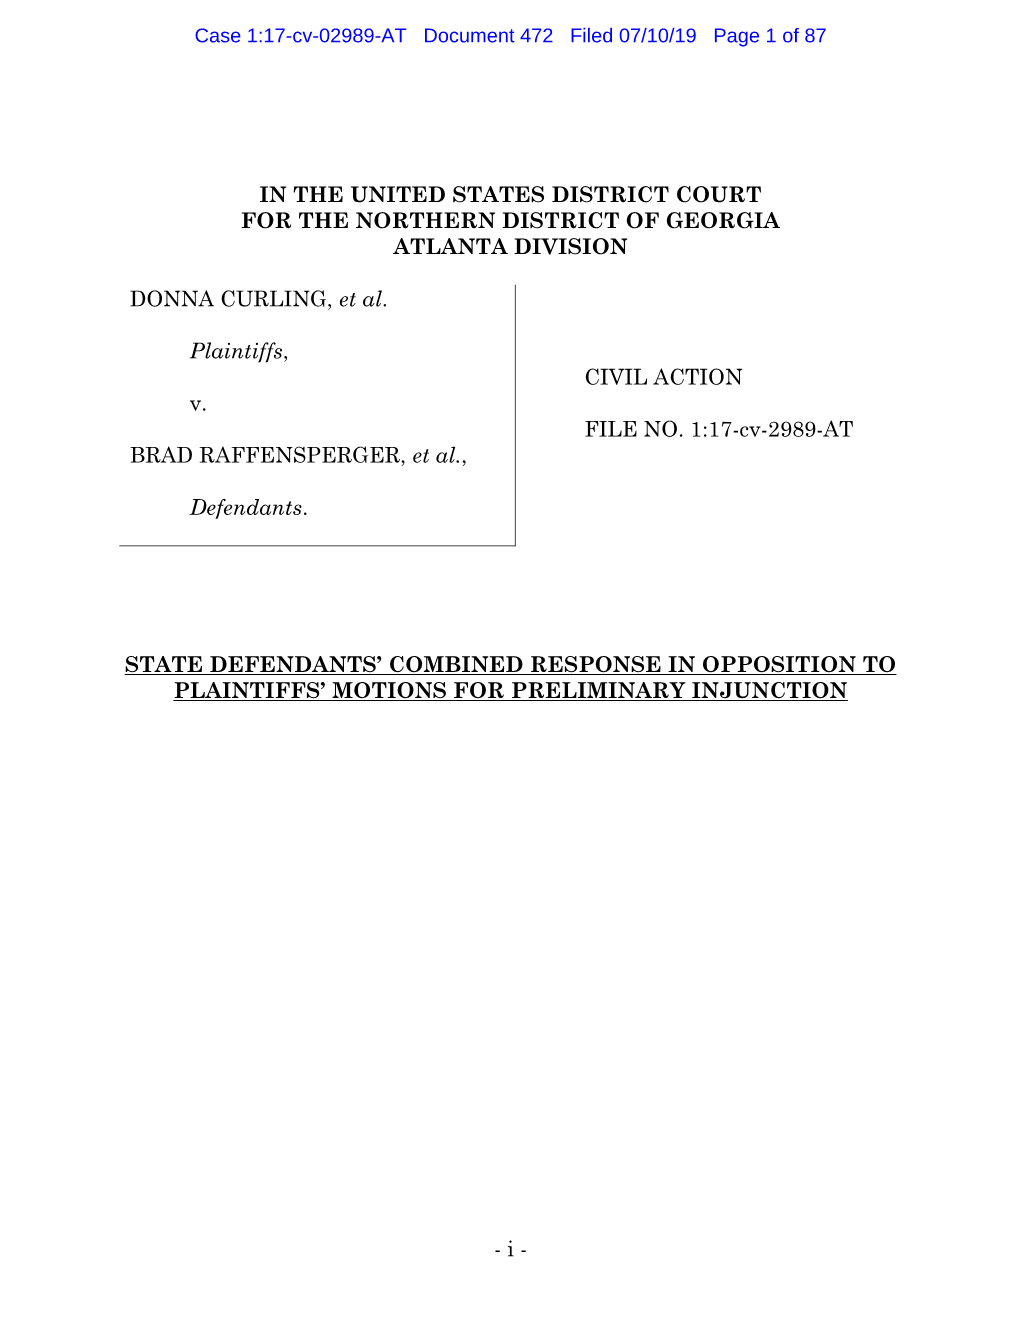 Response in Opposition to Plaintiffs' PI Motions Almost Final 07 10 2019